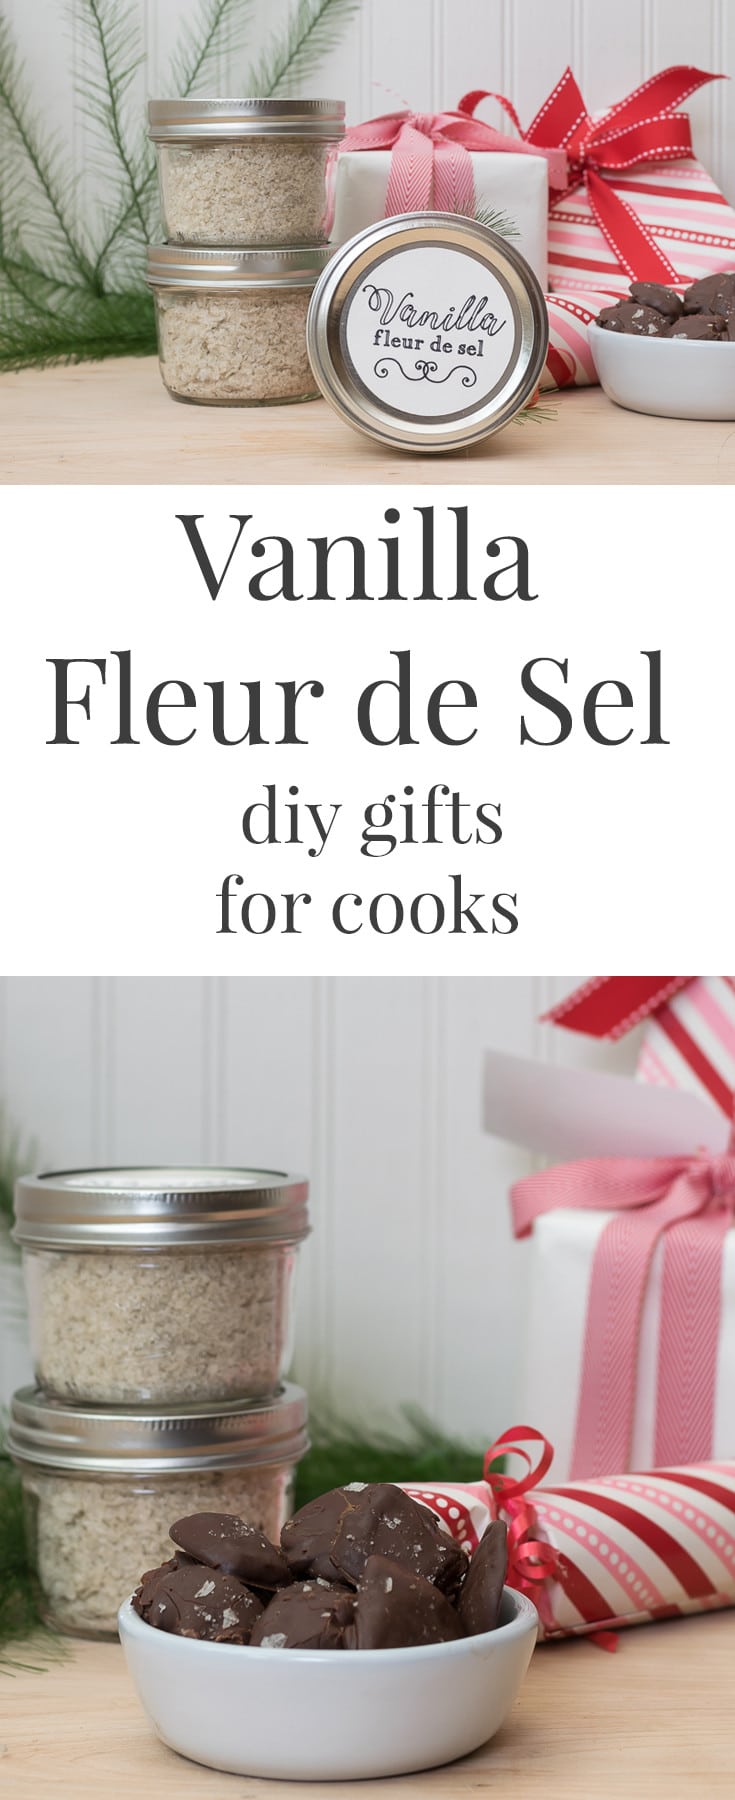 I love making gifts from my kitchen for the holidays. Vanilla Fleur de Sel is so easy to make but will be so appreciated by busy cooks this Christmas. One of three recipes for easy DIY gifts for cooks and foodies.